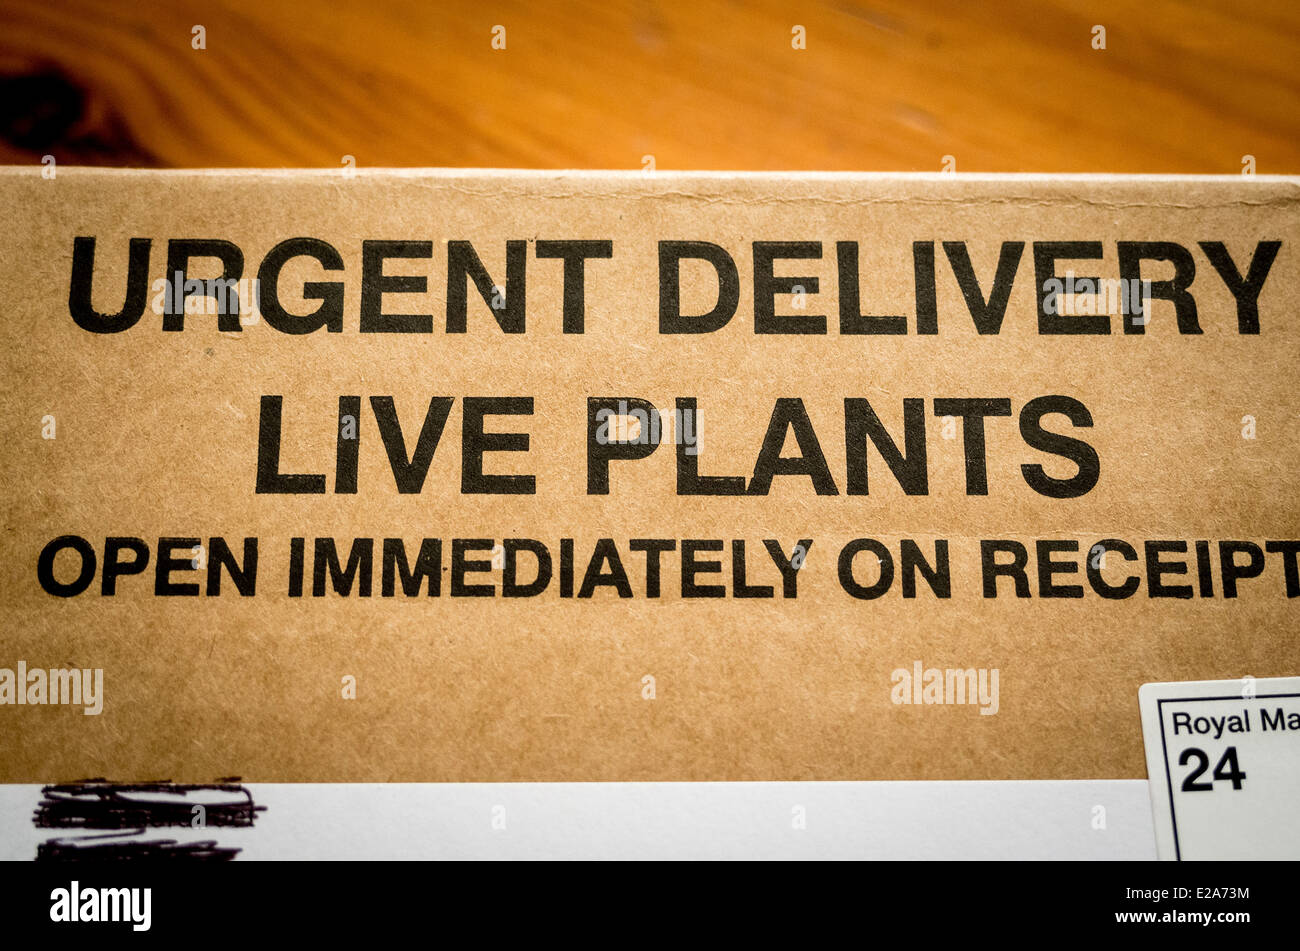 Package with urgent warning of action to take on receipt of living plants Stock Photo